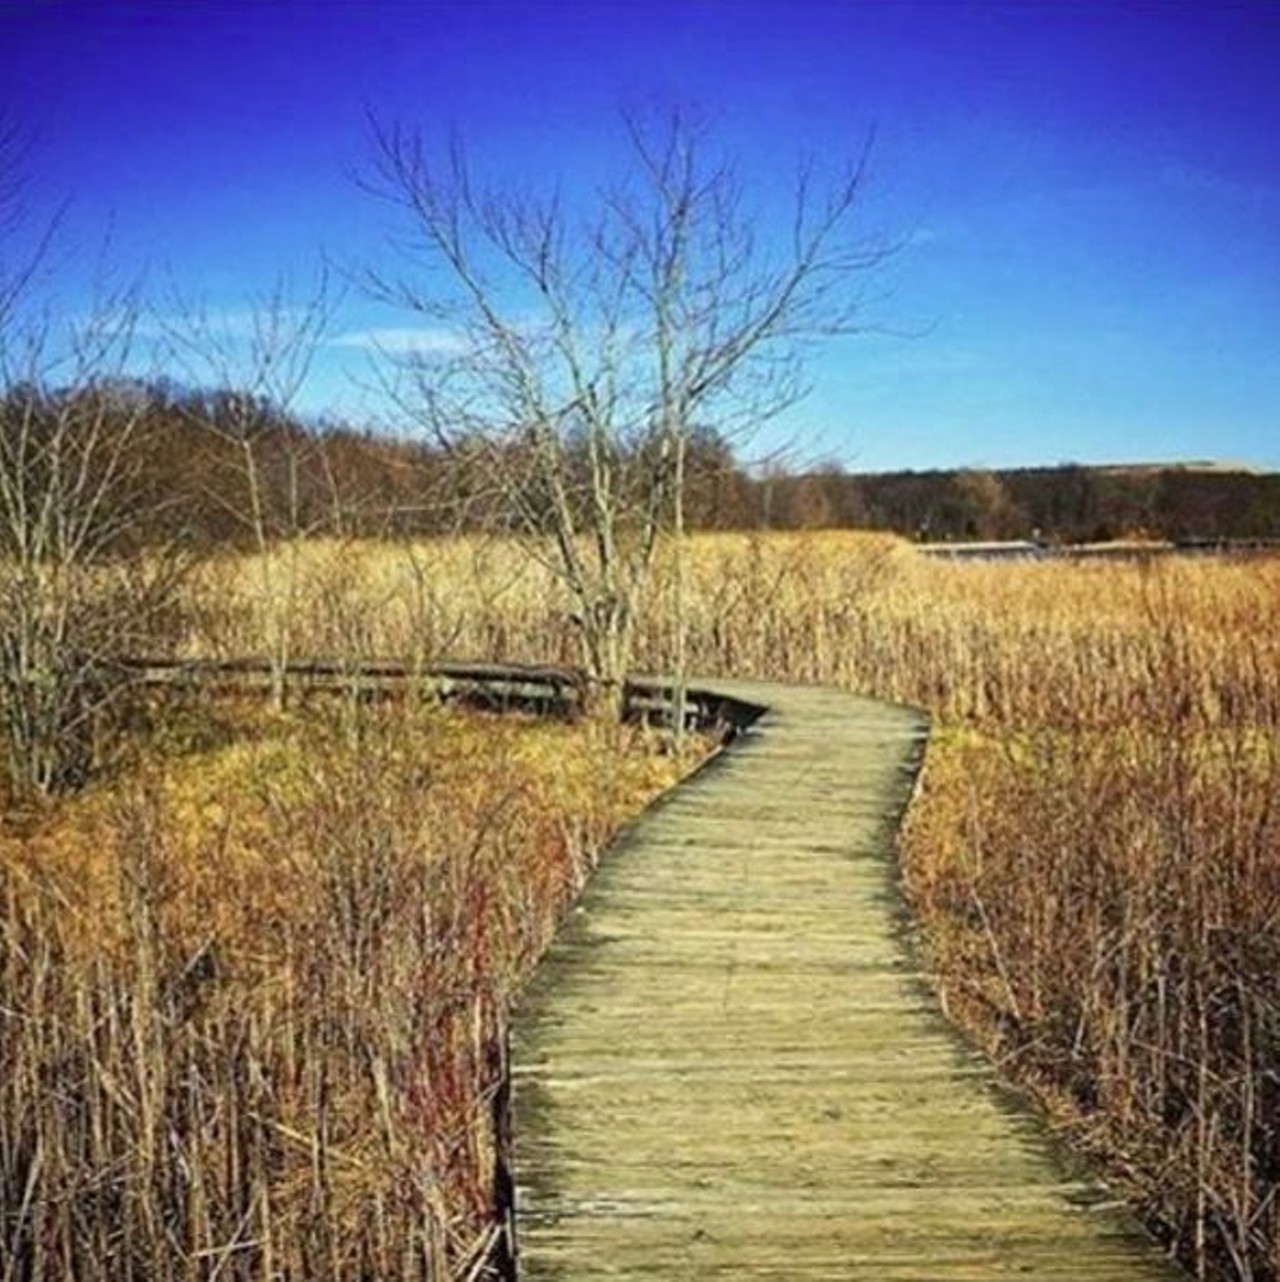 Crosswinds Marsh Park
New Boston
With 8 trails and a boardwalk that goes over a marsh, this park is a beautiful place to spend an afternoon and work off some carbs. 
Photo via Instagram.